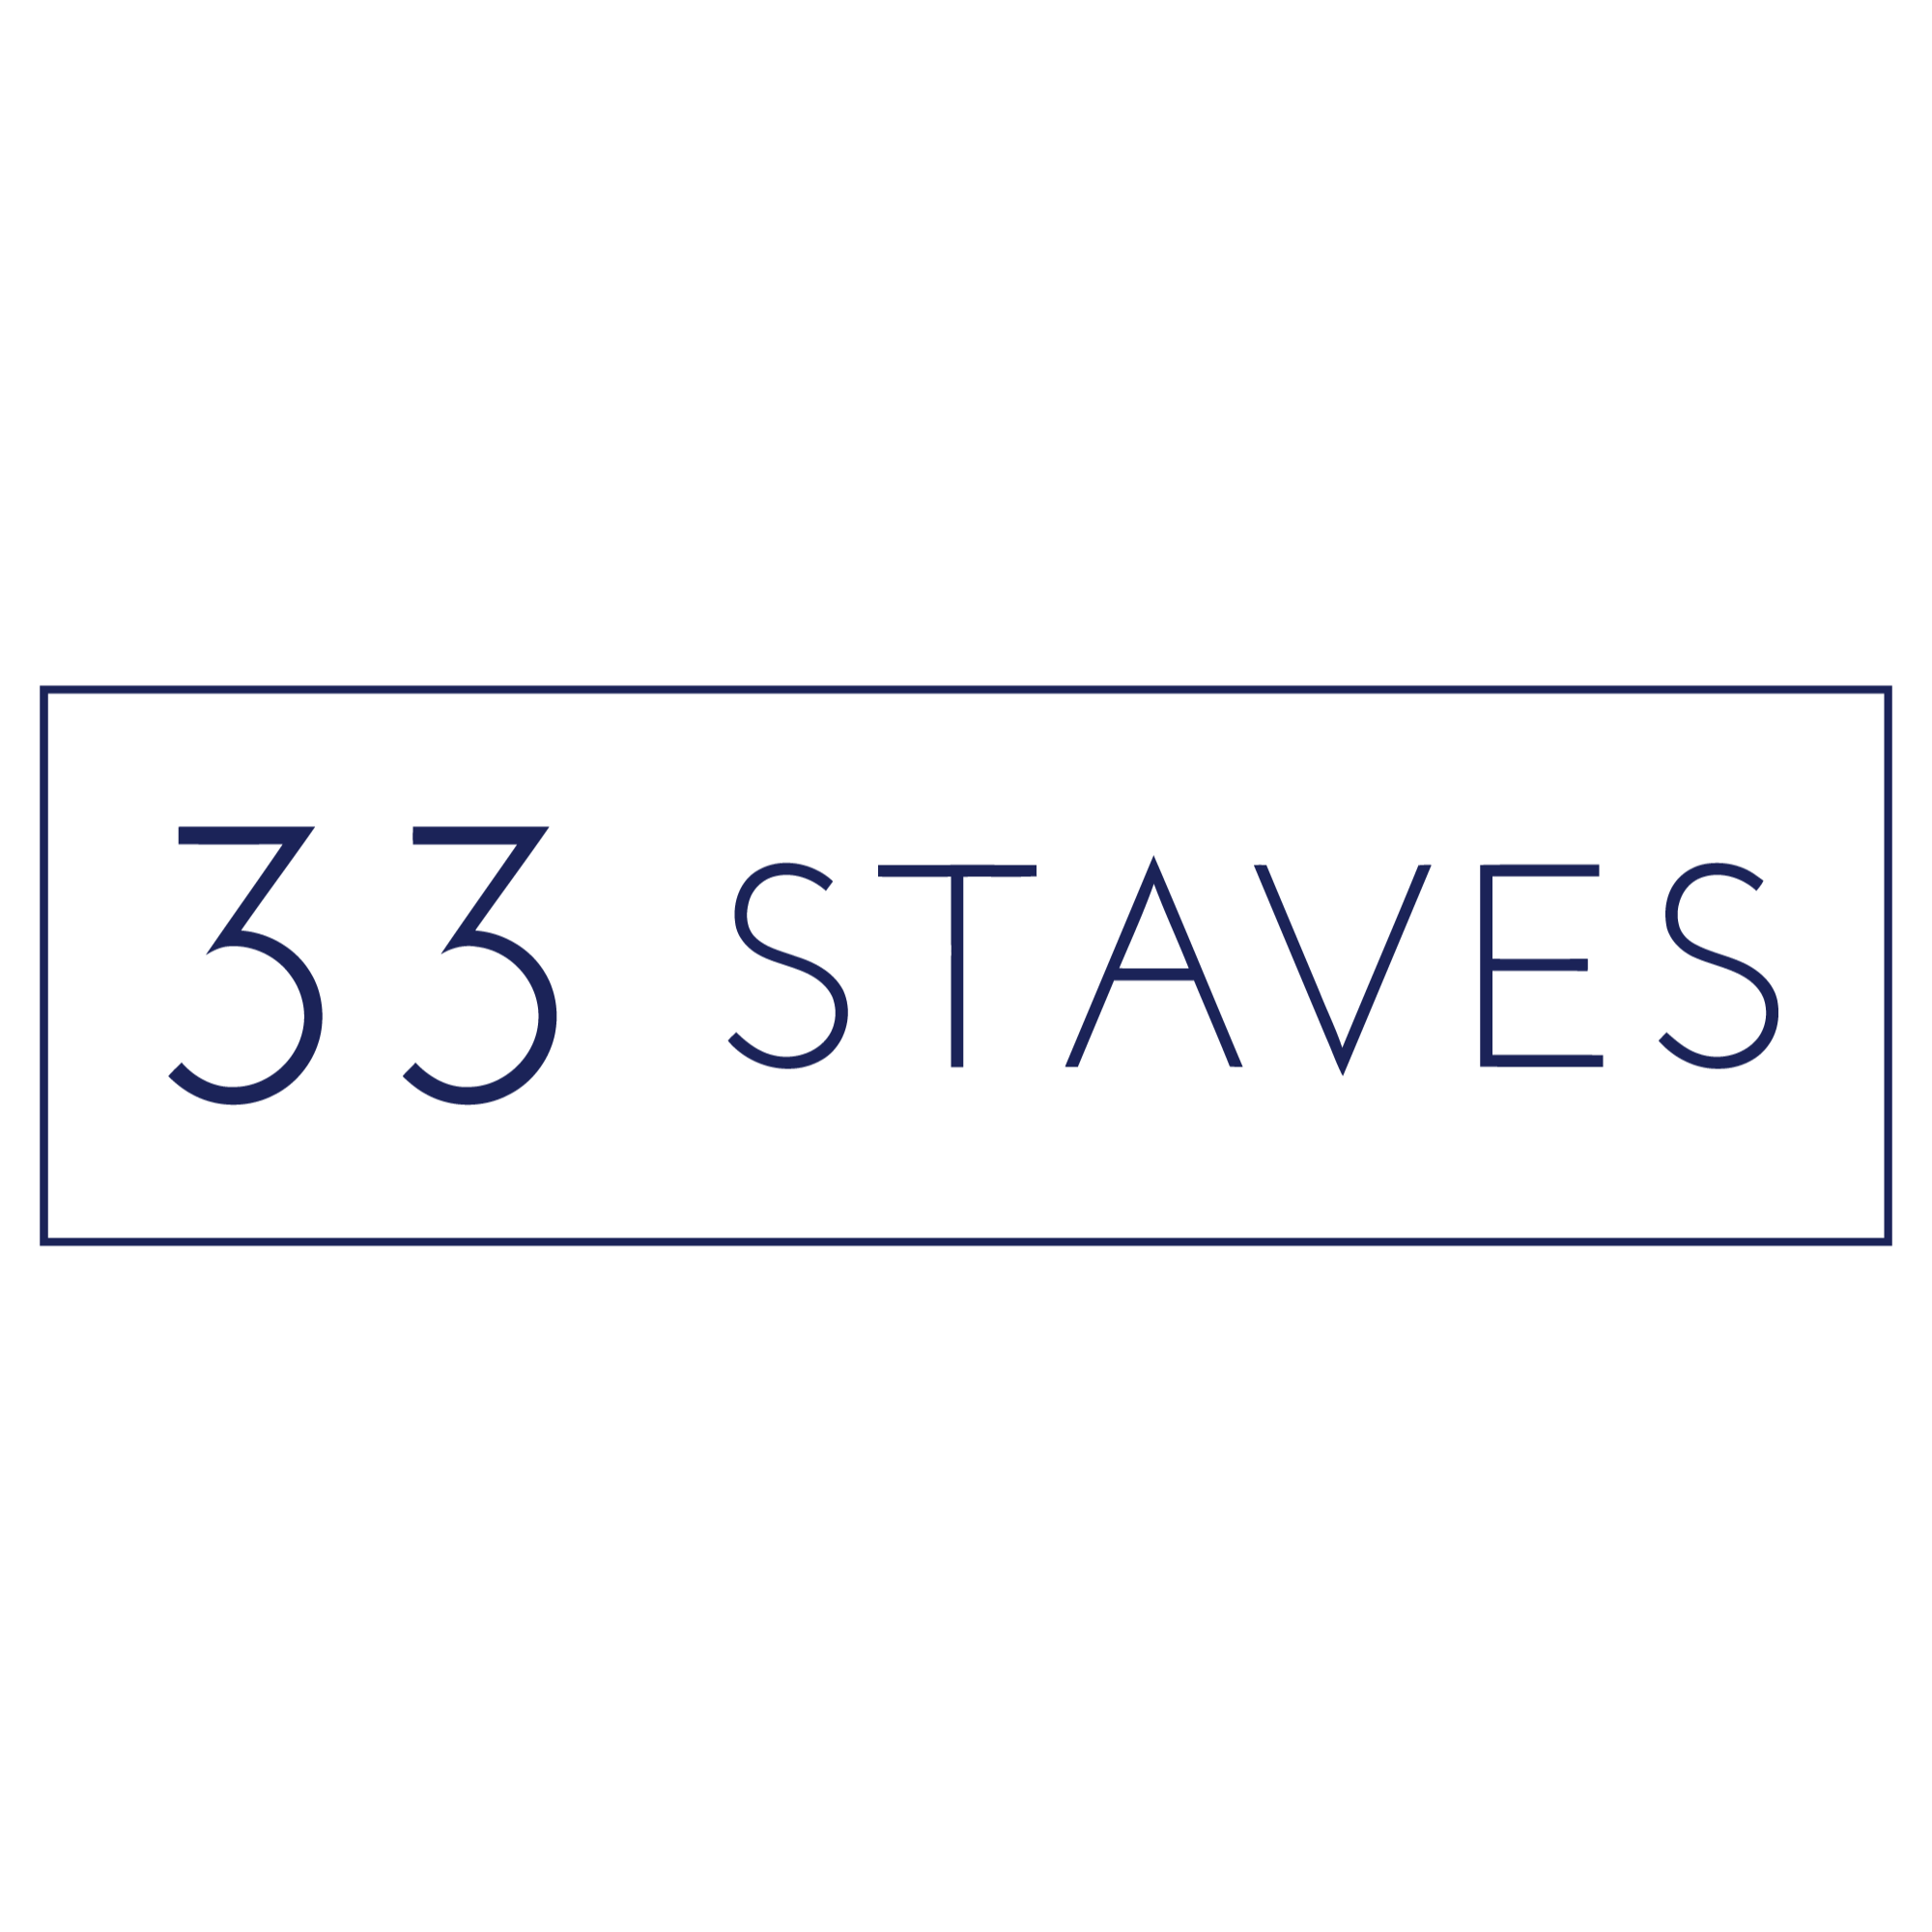 33 Staves